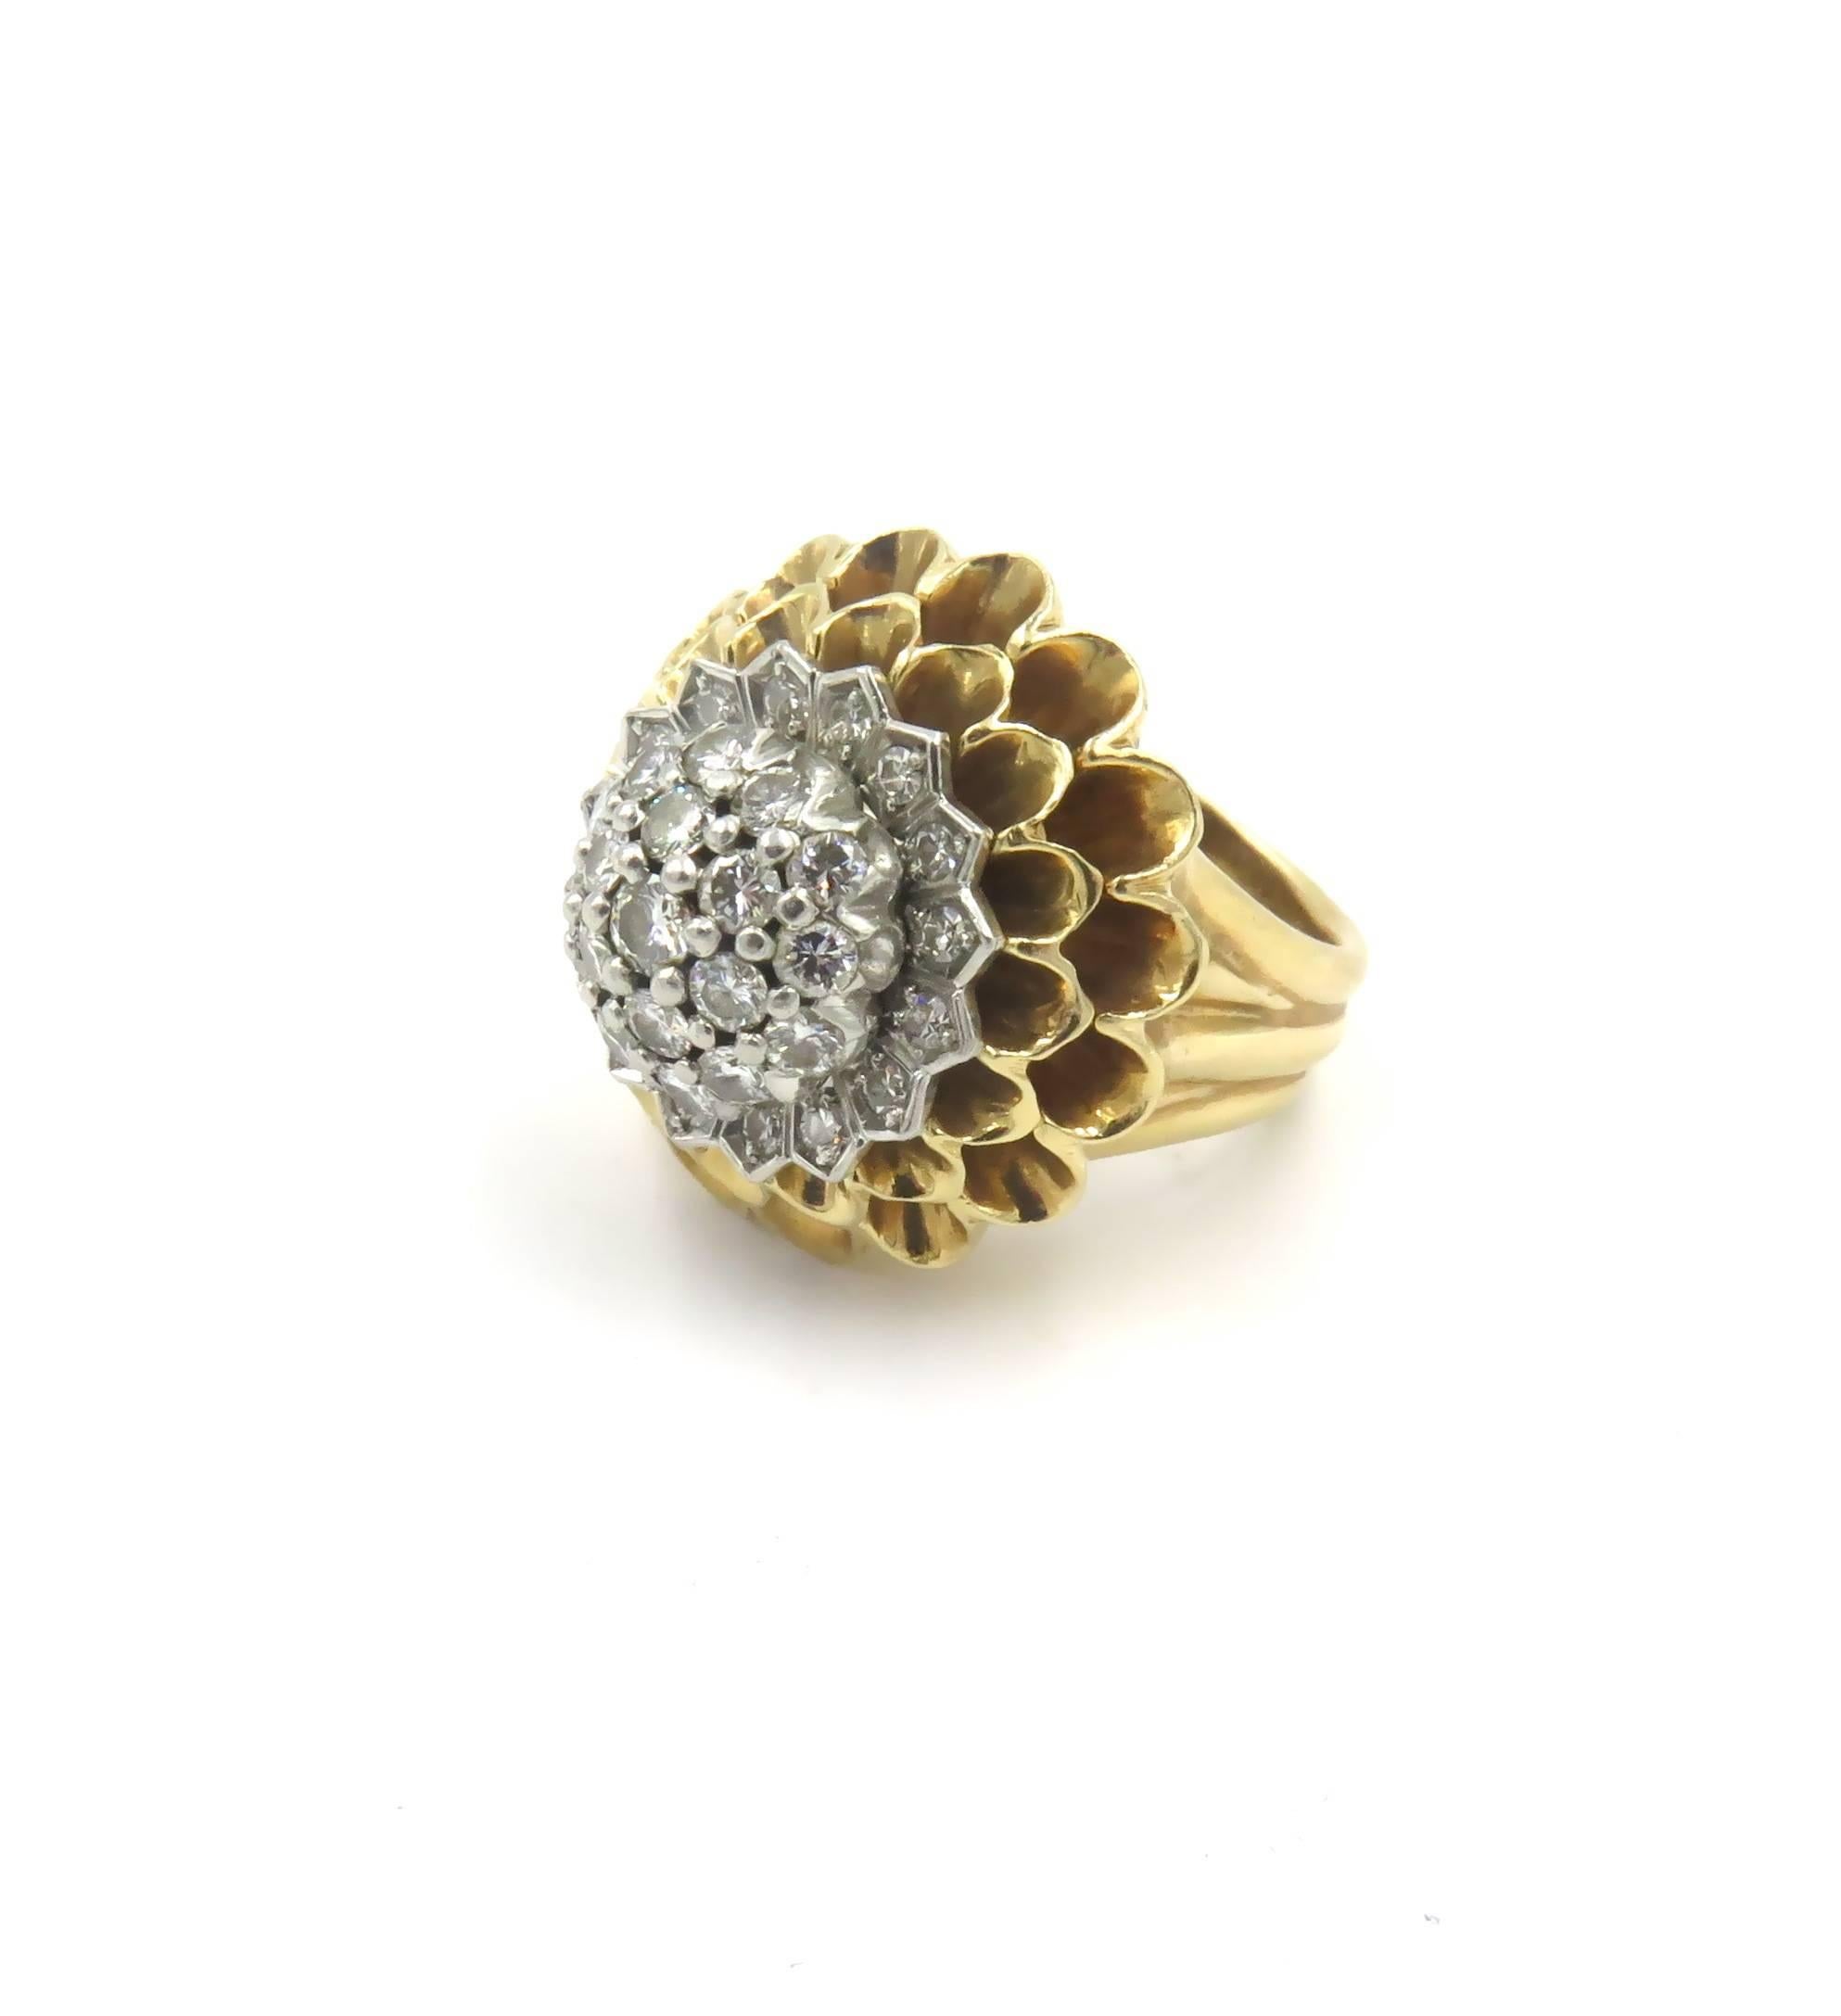 A 14 karat yellow gold and diamond ring.  Tiffany & Co. Circa 1945. Designed as a polished gold chrysanthemum, centering a cluster of circular cut diamonds. Thirty four (34) diamonds weigh approximately 1.40 carats. Size 6. Gross weight is